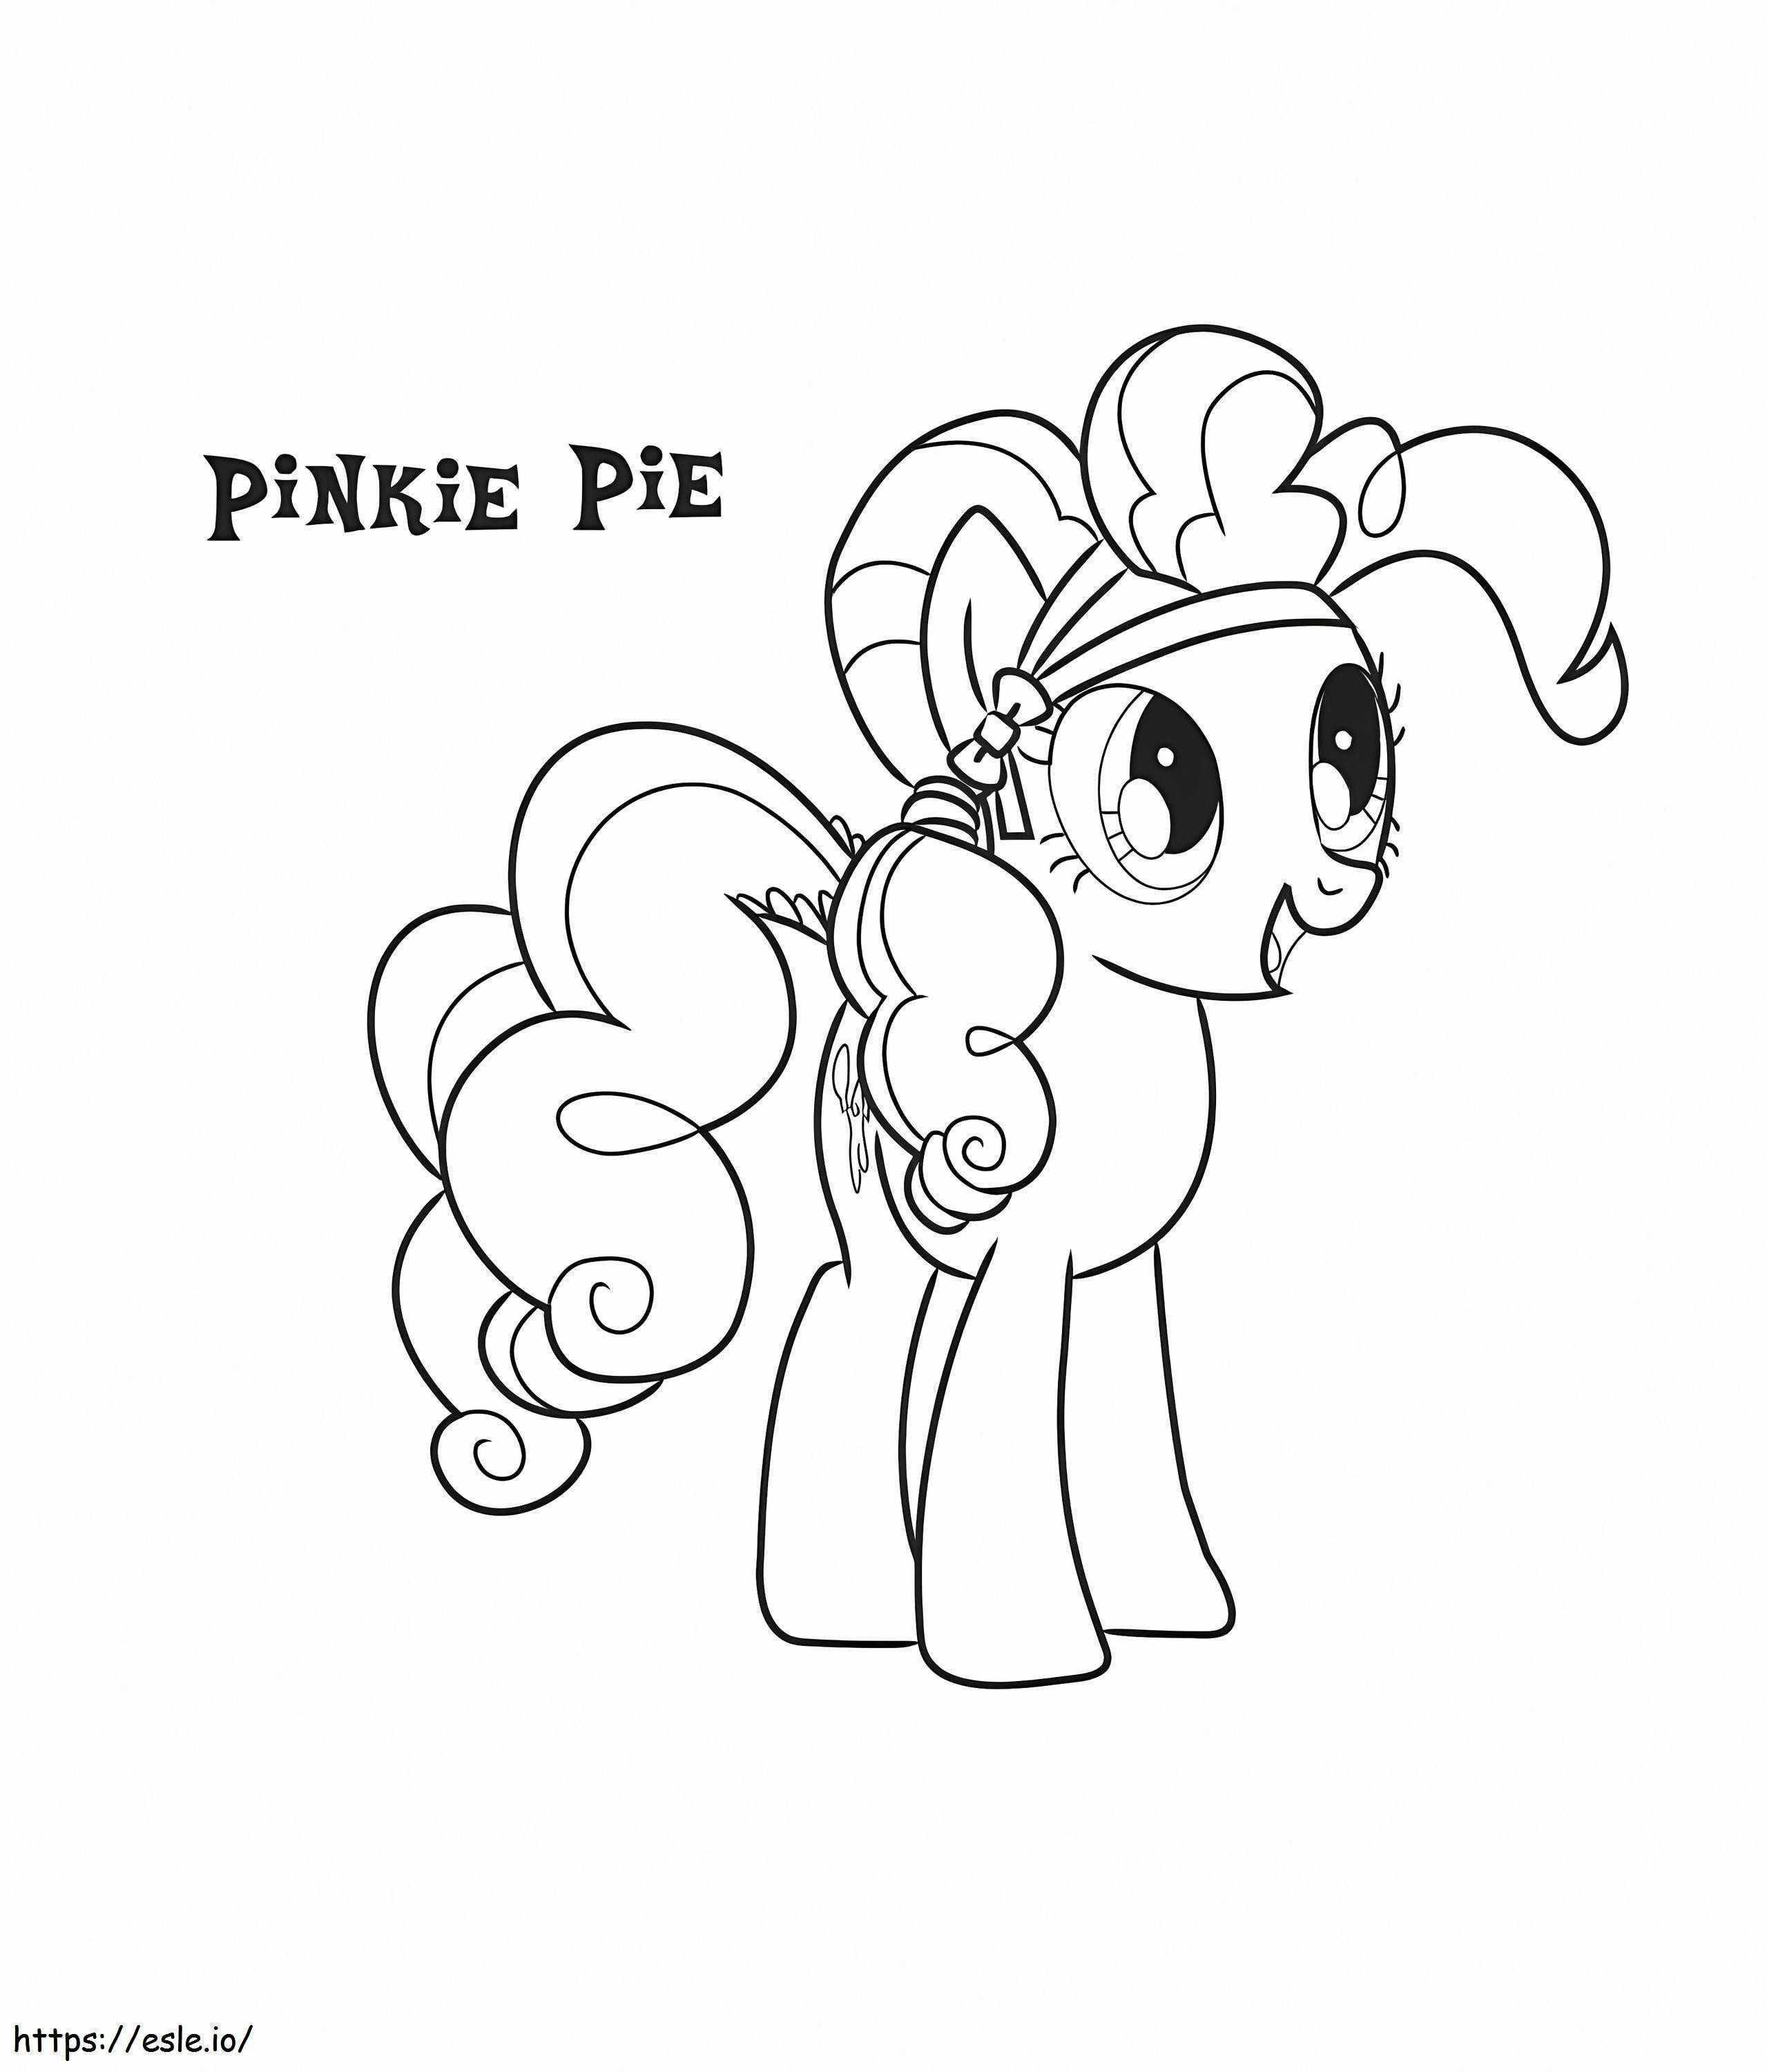 Pinkie Pie Smiling coloring page